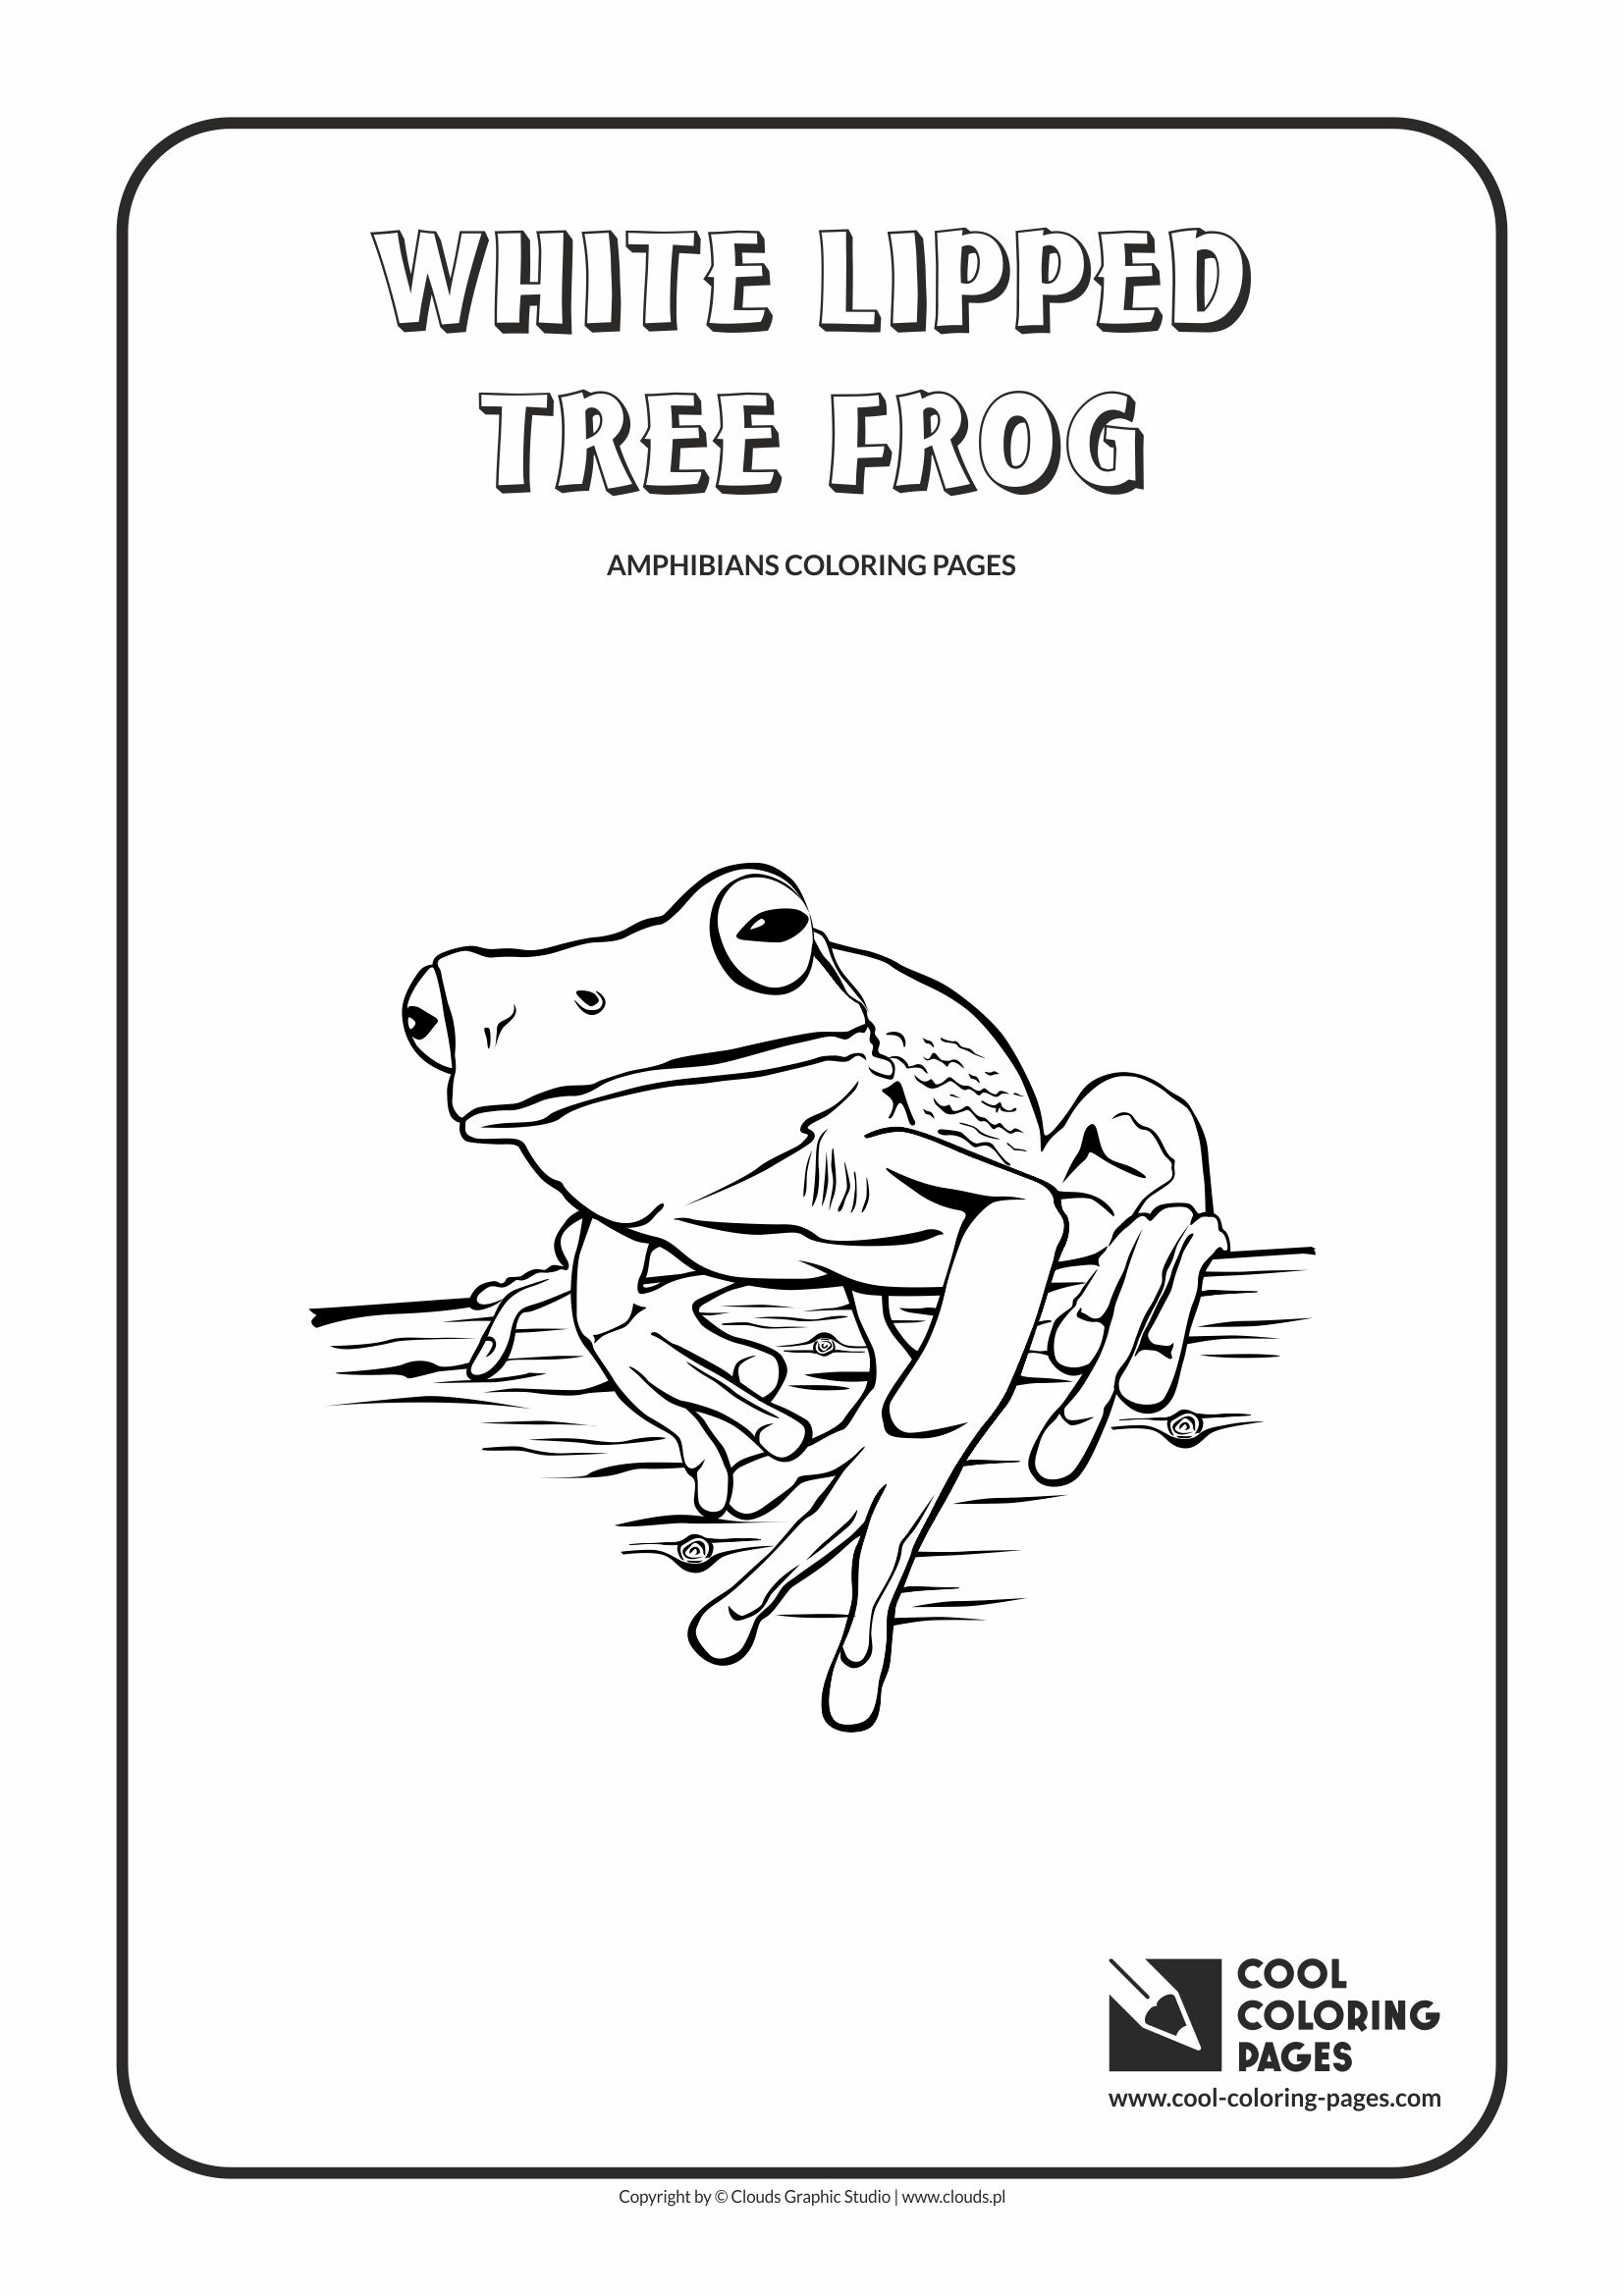 Cool coloring pages white lipped tree frog coloring page